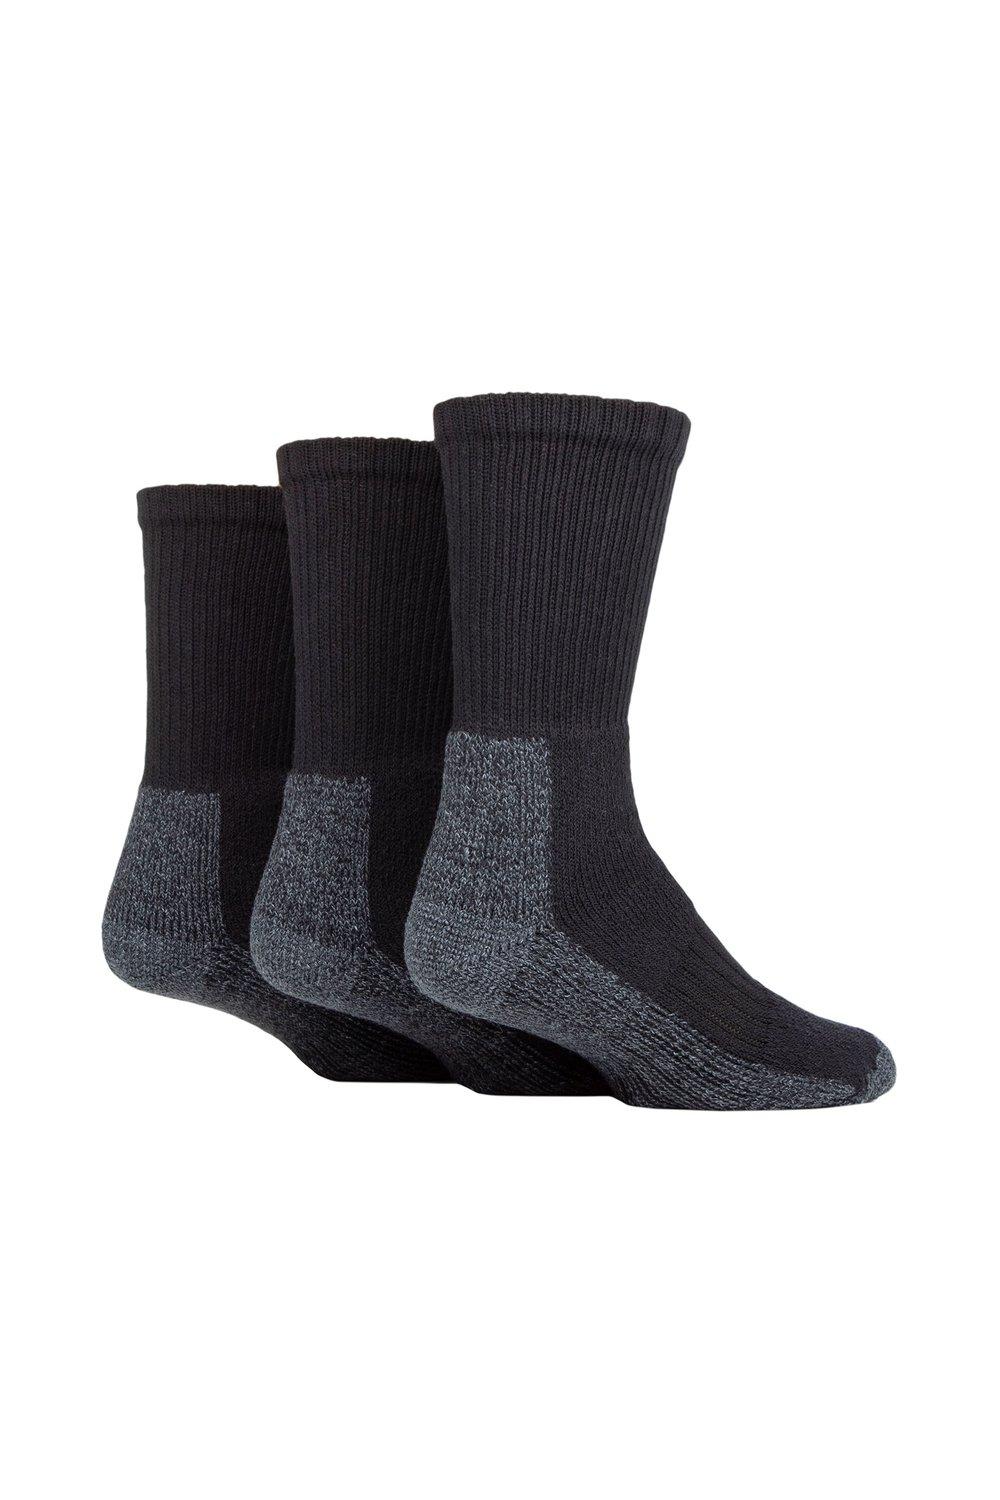 3 Pair Safety Boot Socks